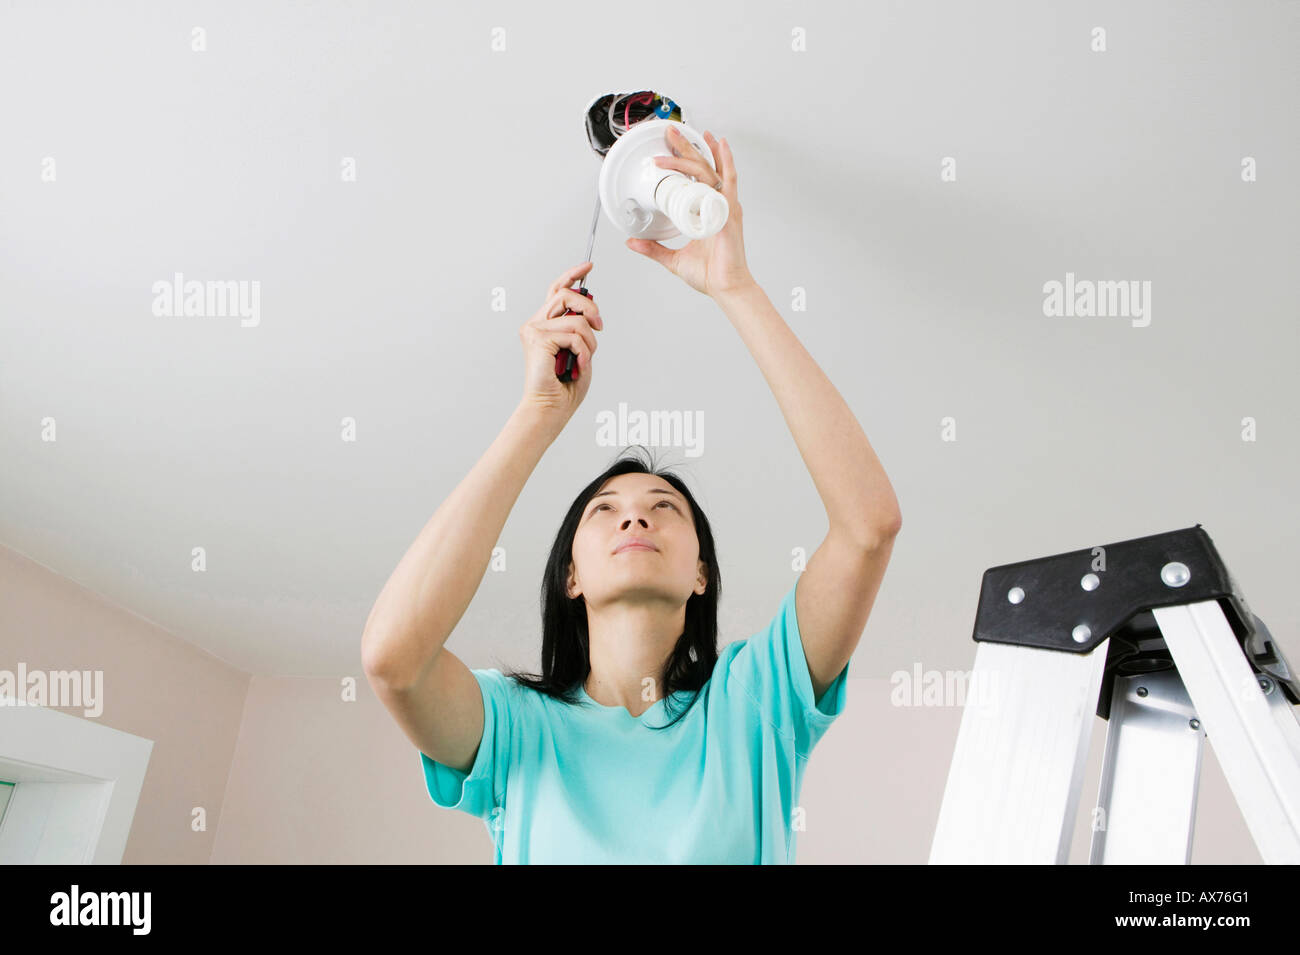 Low angle view of a young woman fixing a light fixture Stock Photo